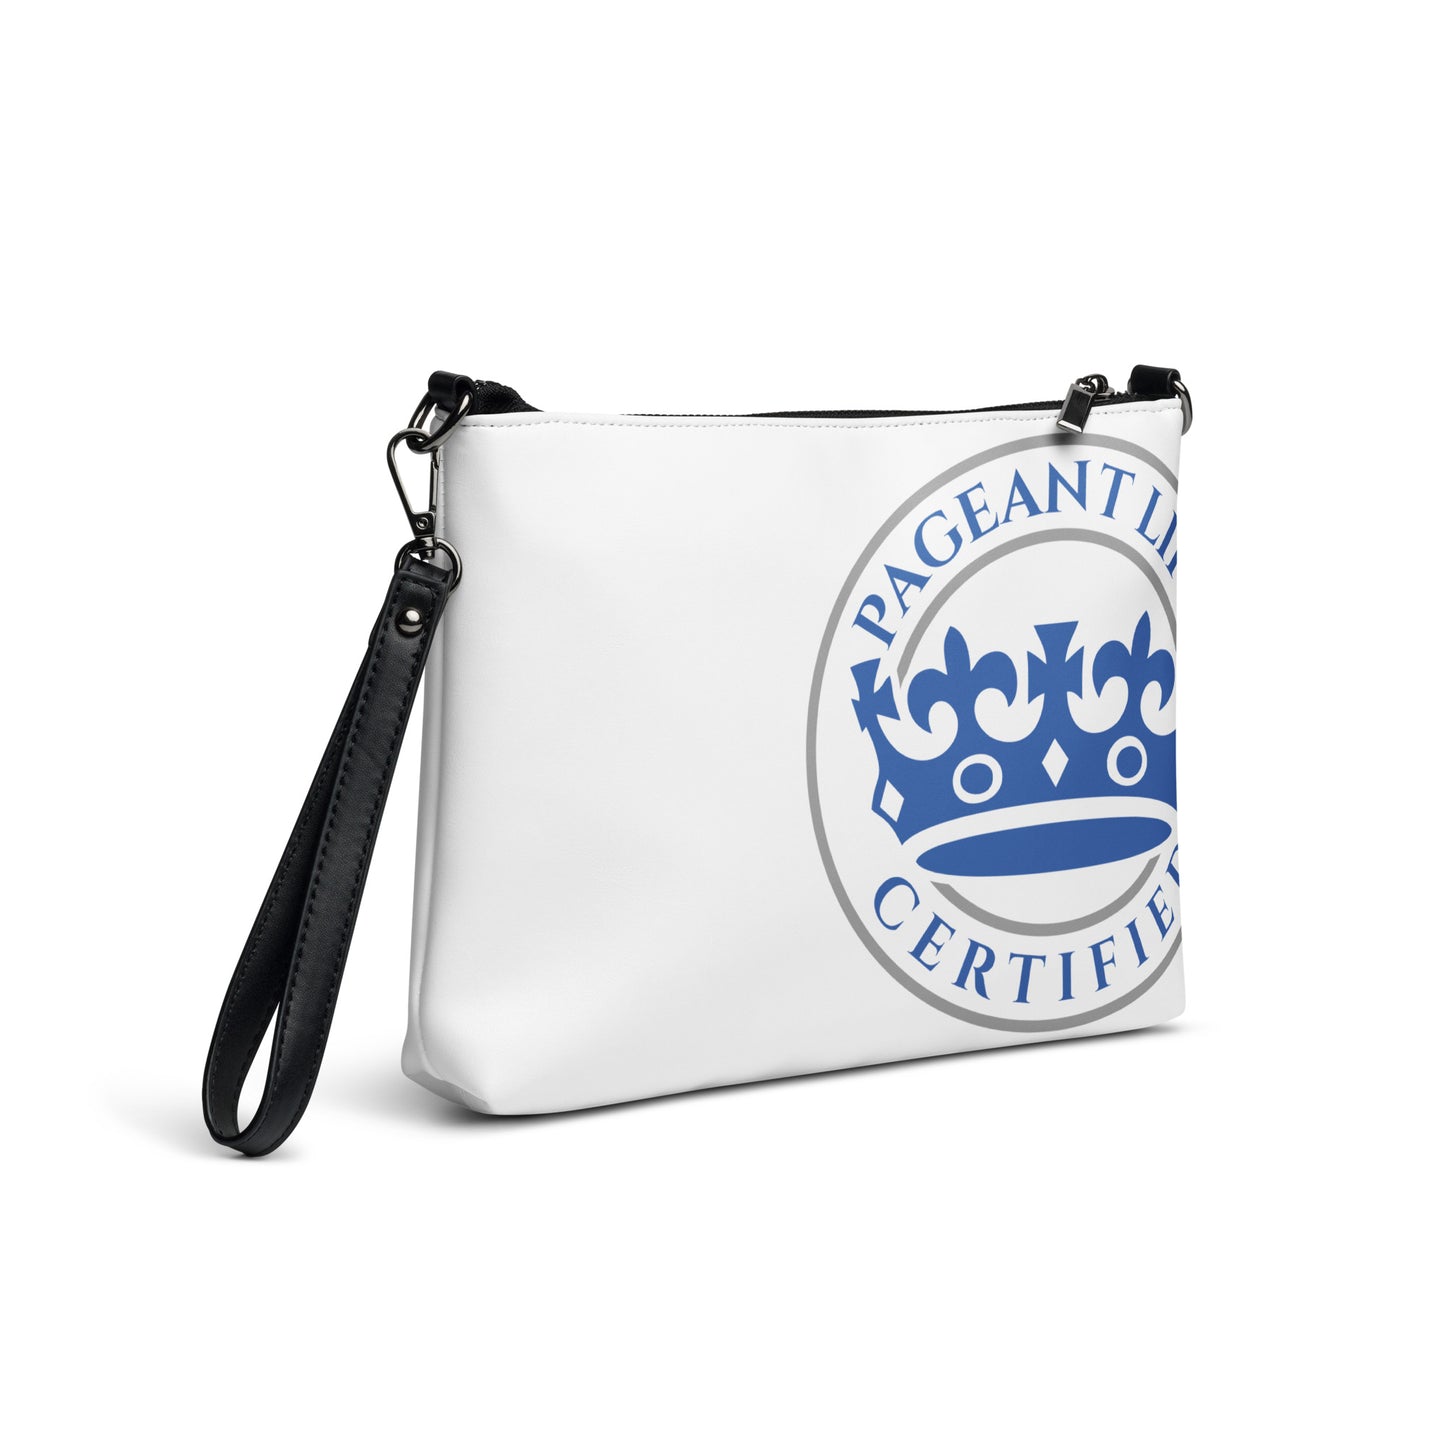 Blue Silver and White Pageant Life Certified Crossbody bag